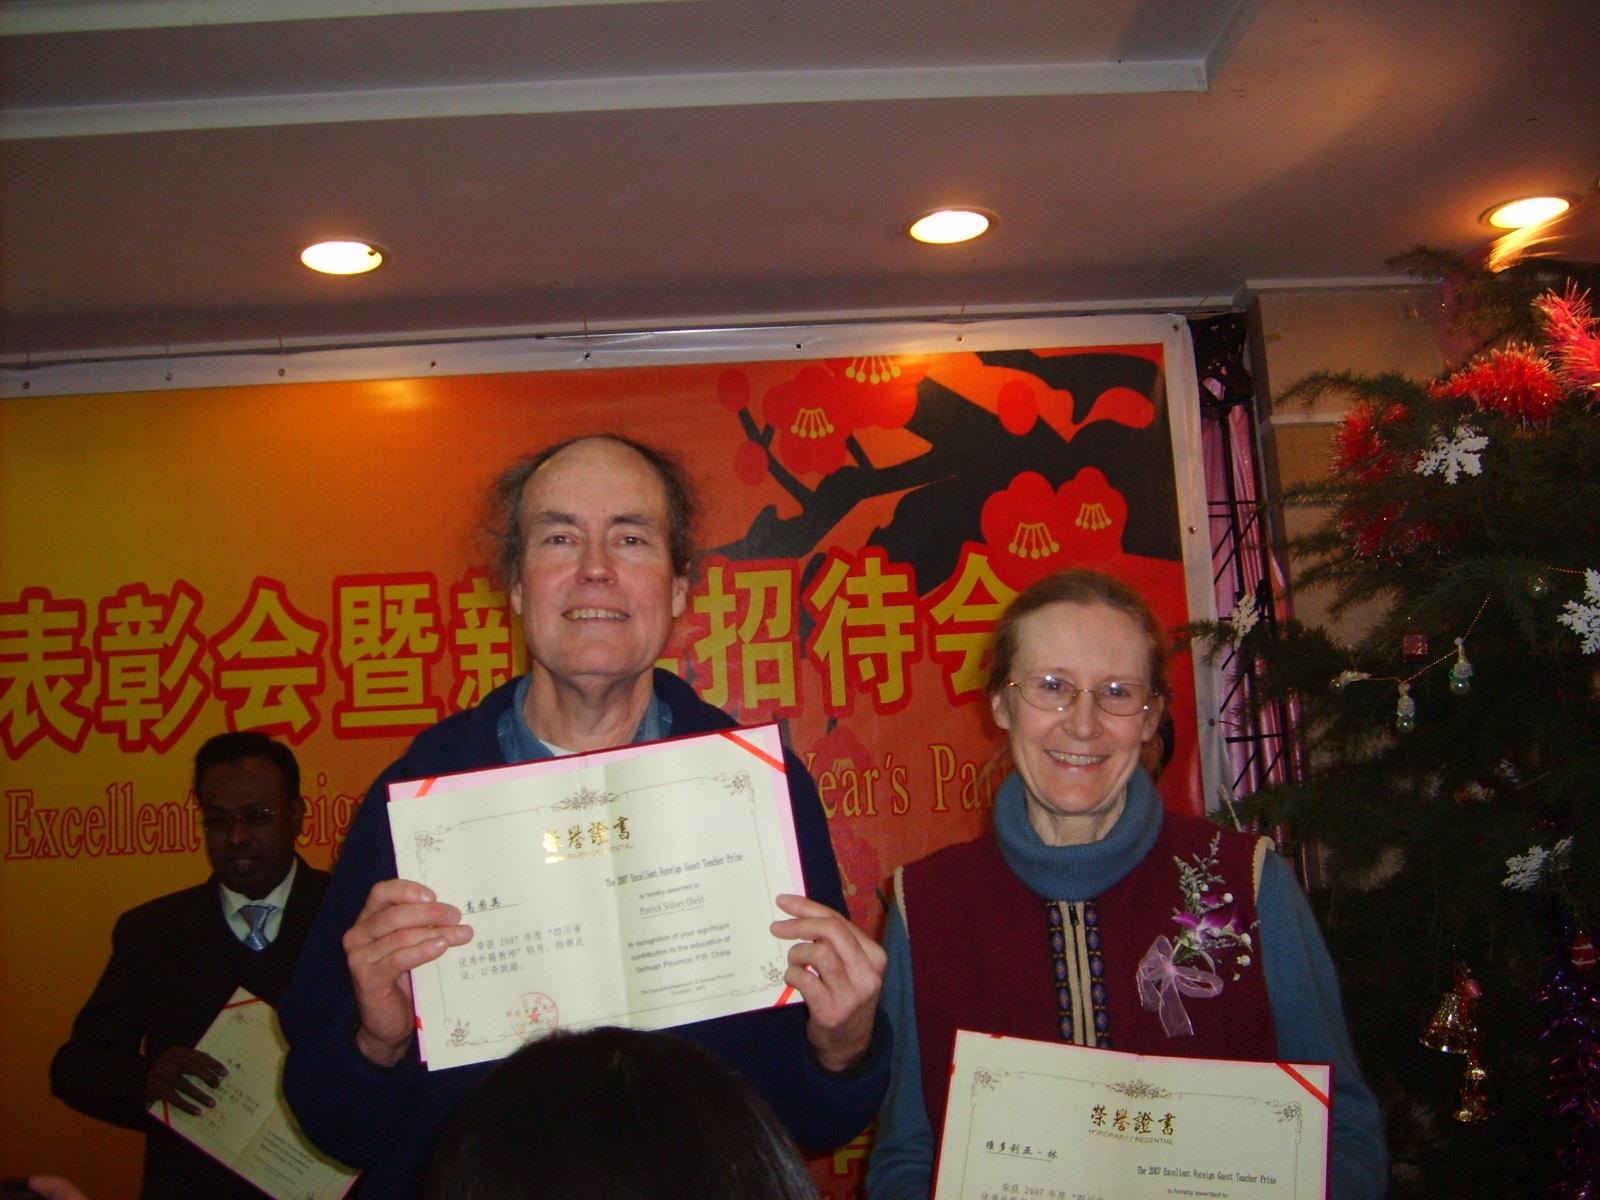 Two  foreign  teachers  Awarded  the  Title  of  'Outstanding  Foreign  Teacher  of  Sichuan  Province  in  2007'